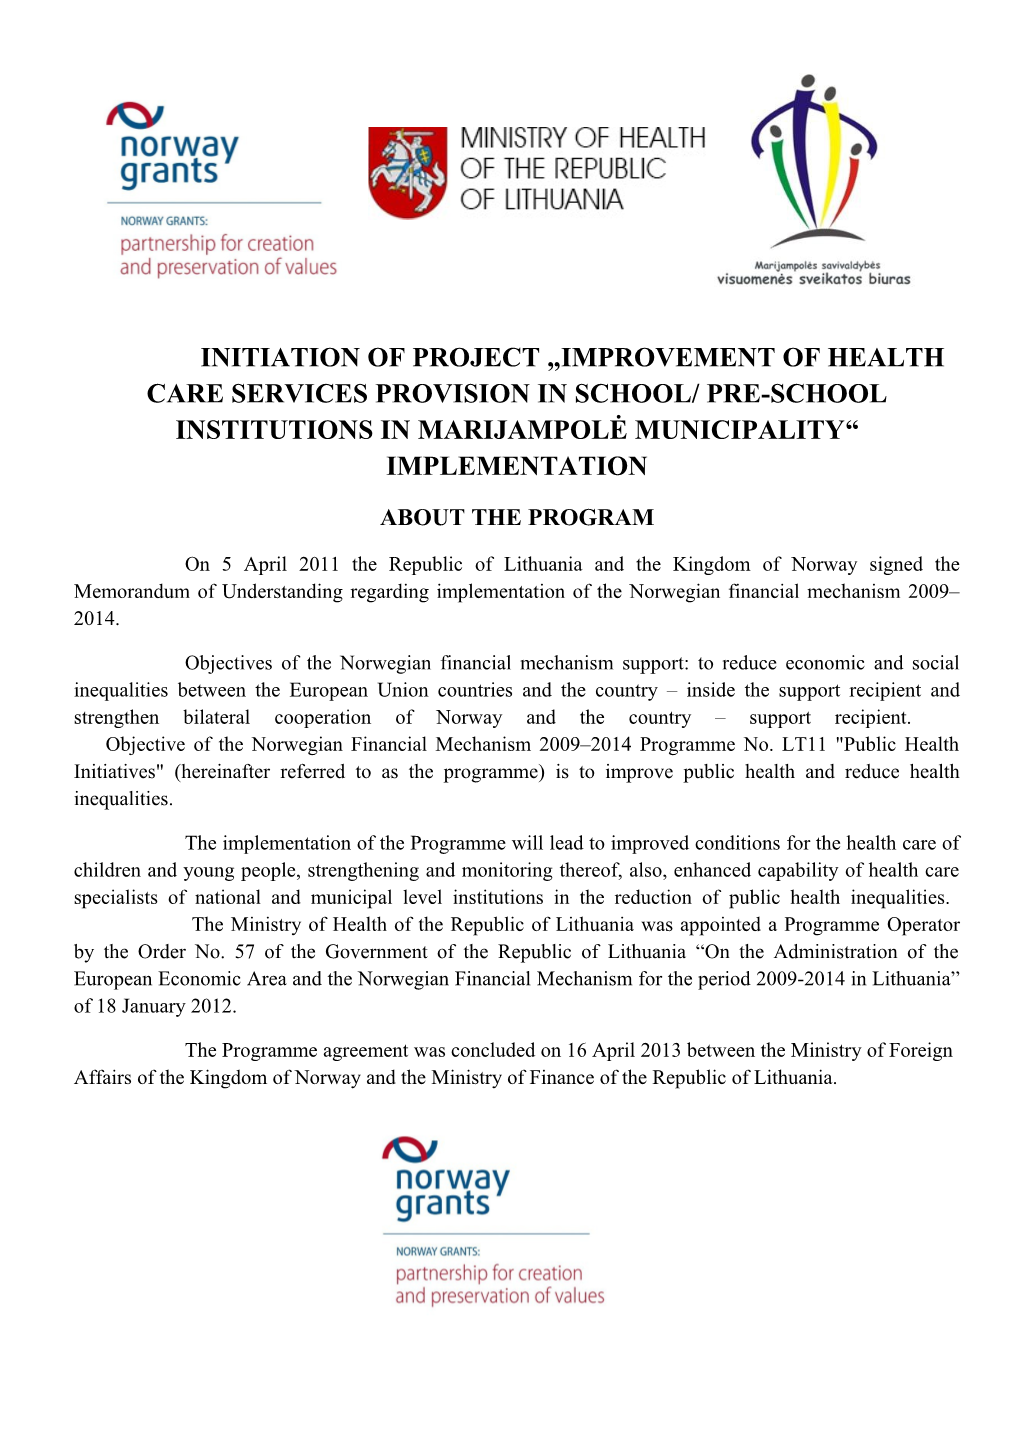 Initiation of Project Improvement of Health Care Services Provision in School/ Pre-School